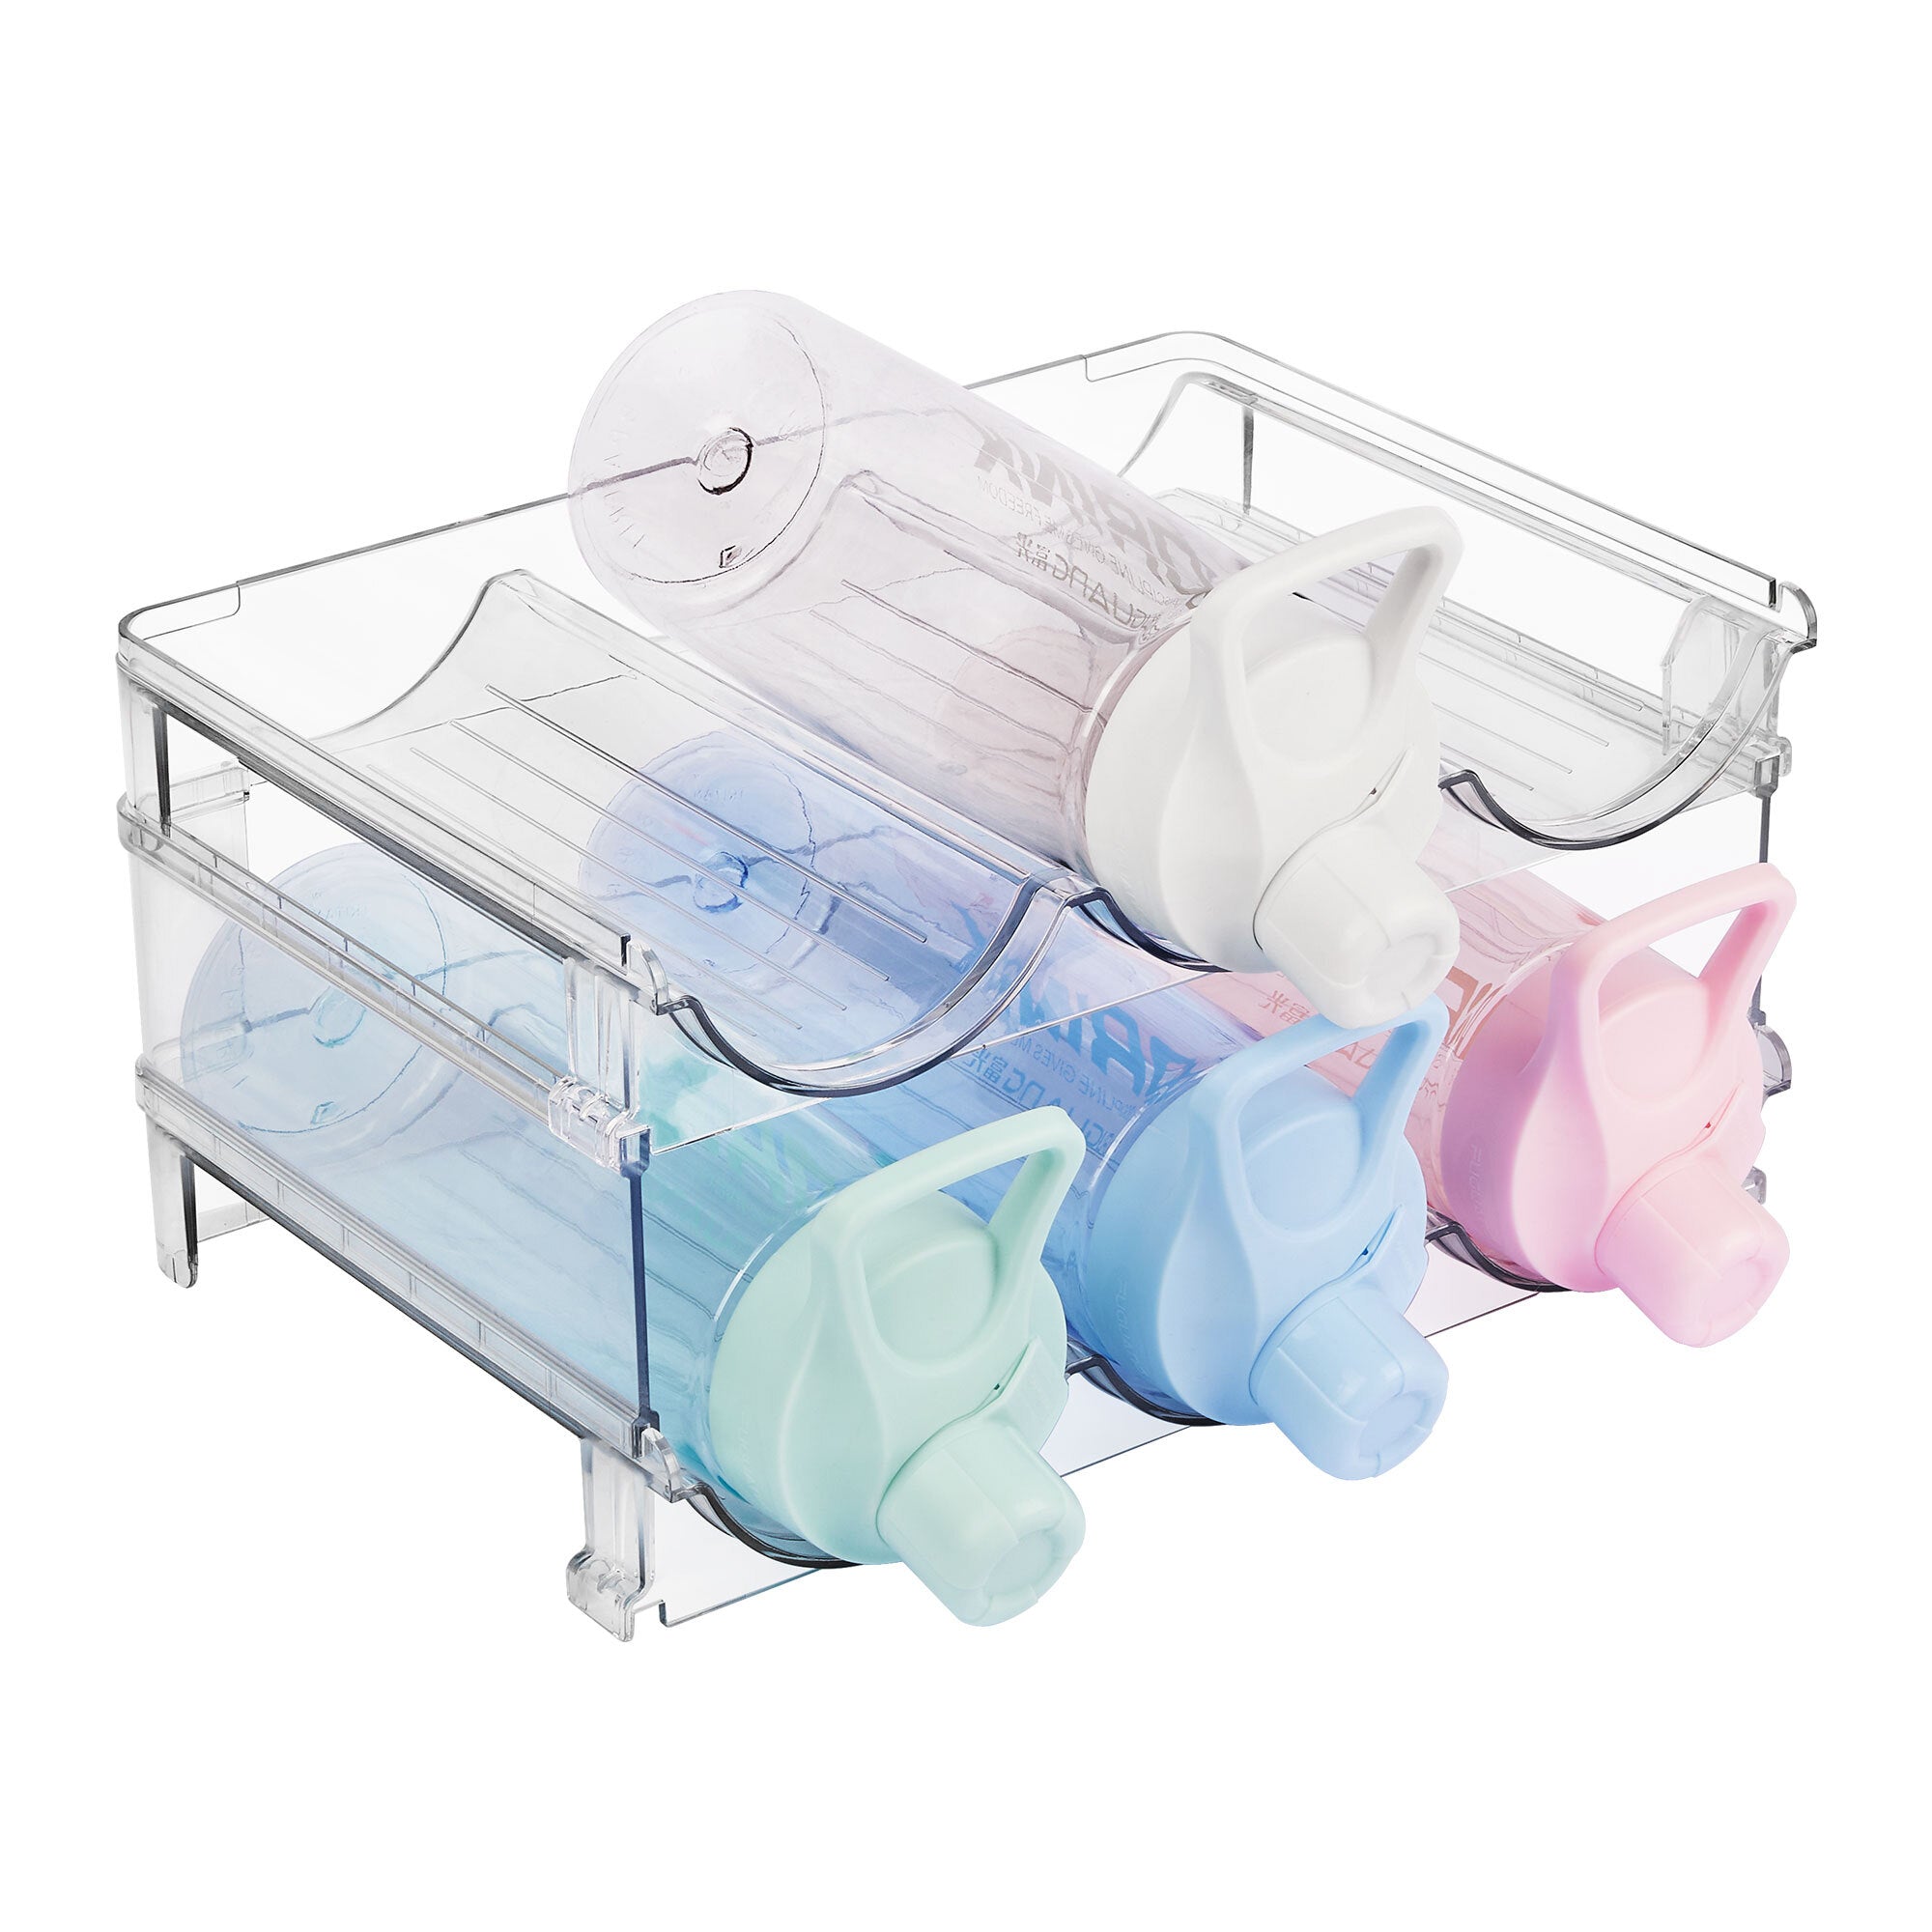  Vtopmart 6 Pack Clear Stackable Storage Bins with Lids